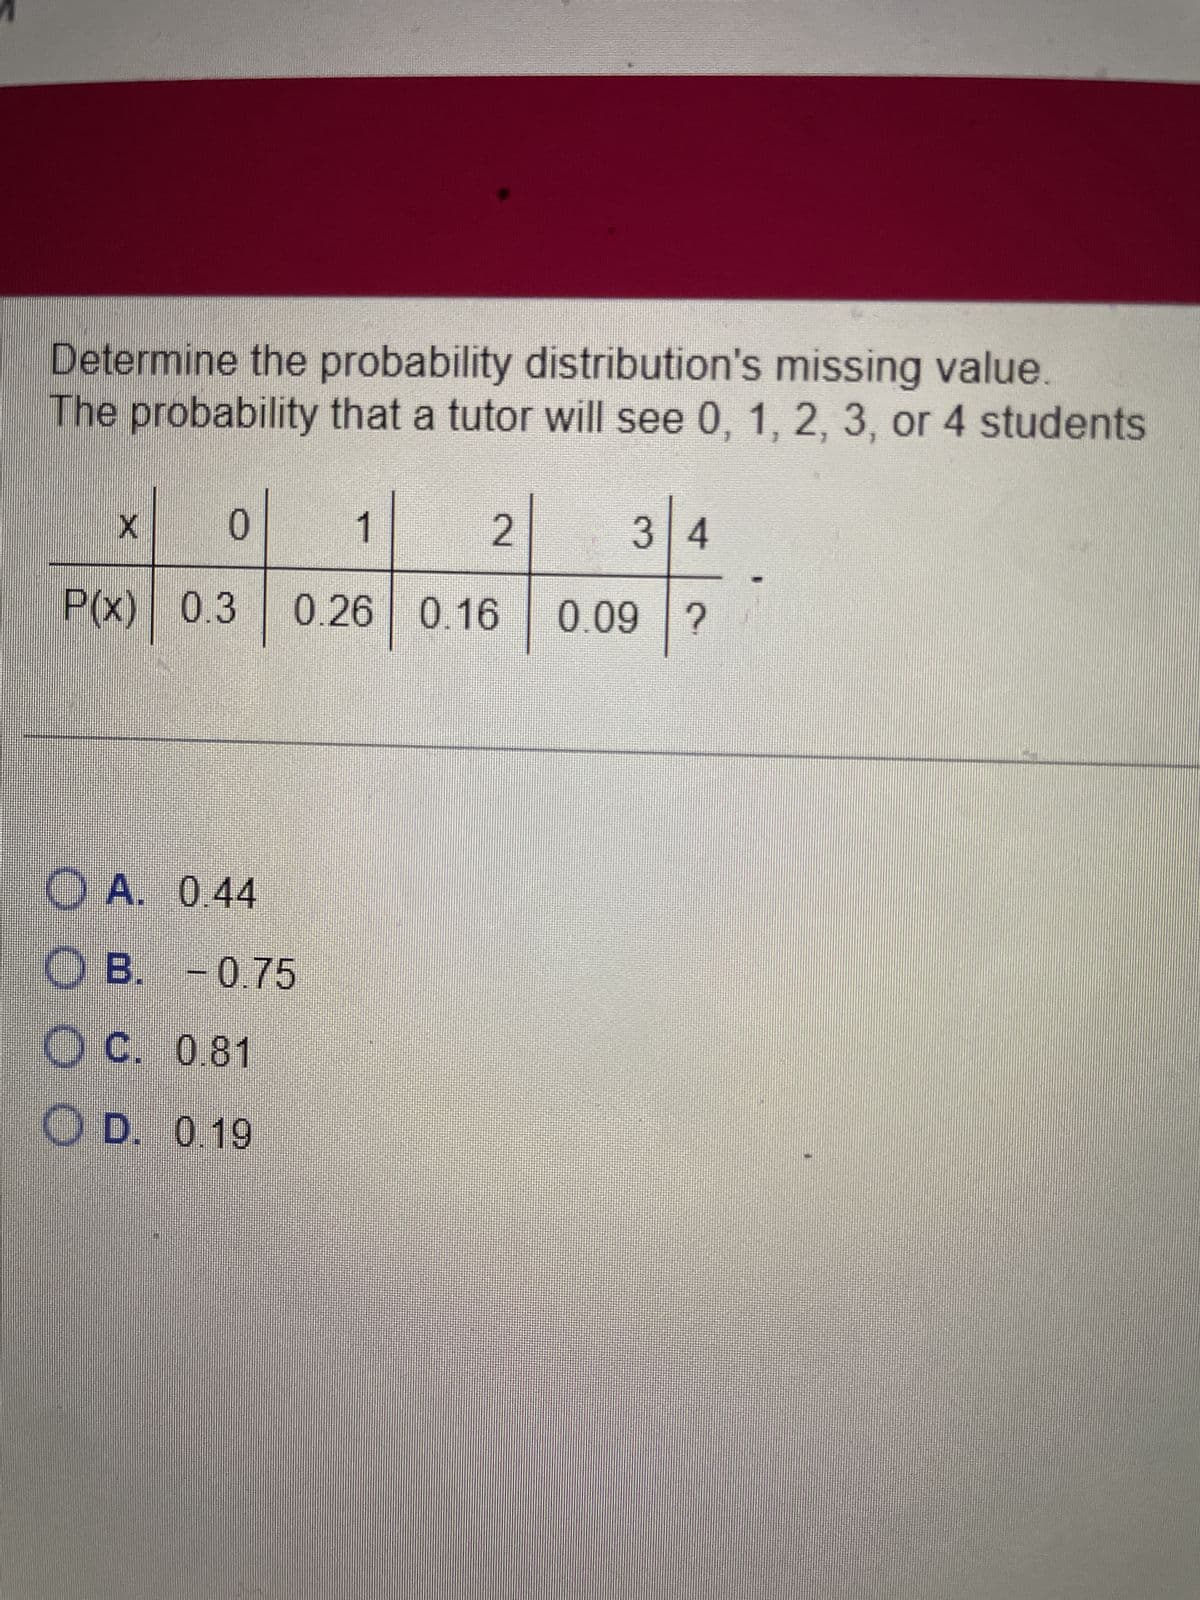 Determine the probability distribution's missing value.
The probability that a tutor will see 0, 1, 2, 3, or 4 students
0
P(x) 0.3
X
1
A. 0.44
OB. -0.75
C. 0.81
D. 0.19
2
0.26 0.16
34
0.09 ?